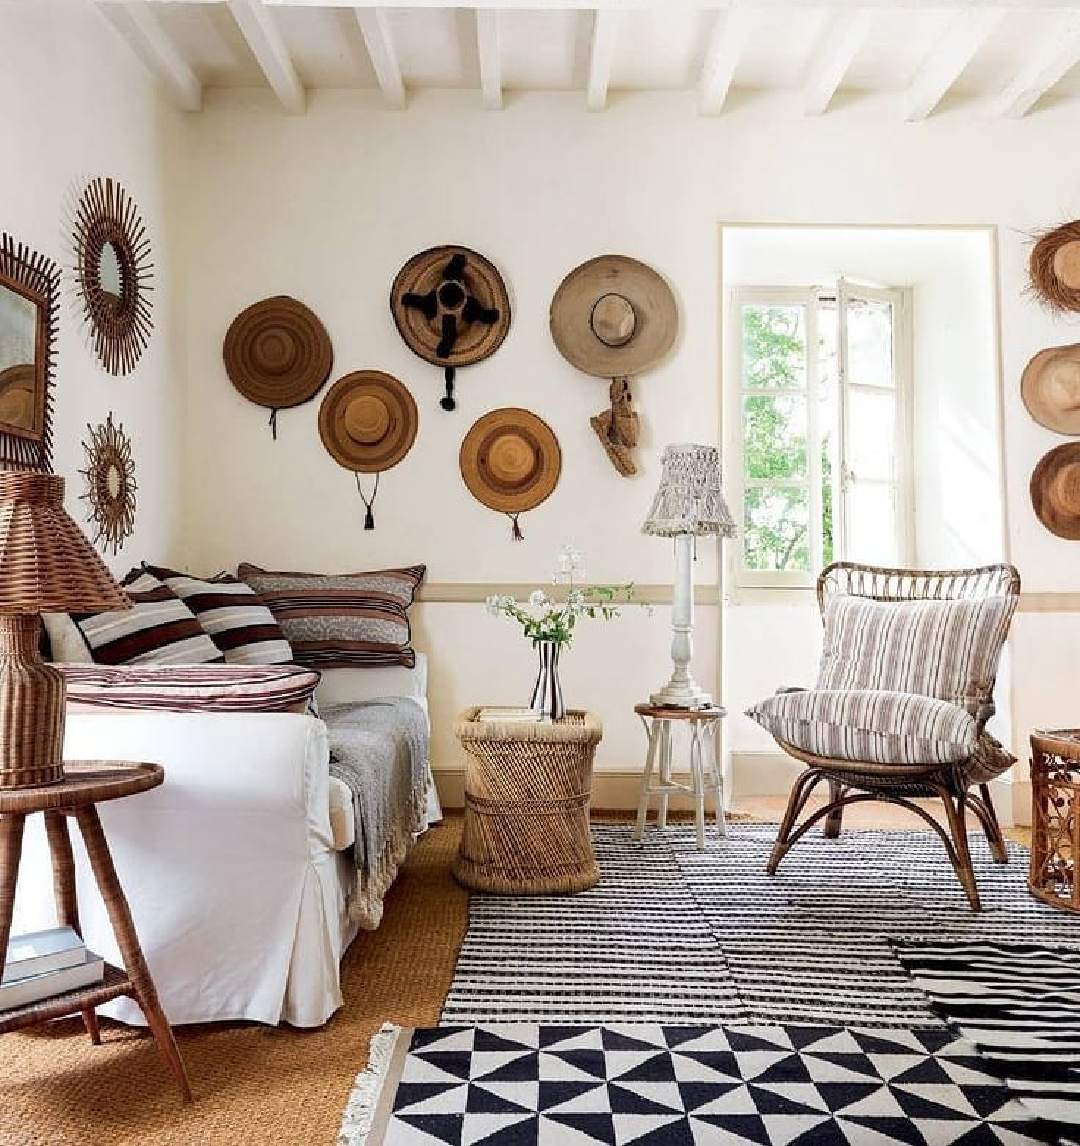 Rustic refined living room in France (Luncinda Chambers) with charming straw hats on wall - @houseandgardenuk. #frenchcountry #frenchrustic #rusticrefined #livingroom #interiordesign #livingrooms #rusticdecor